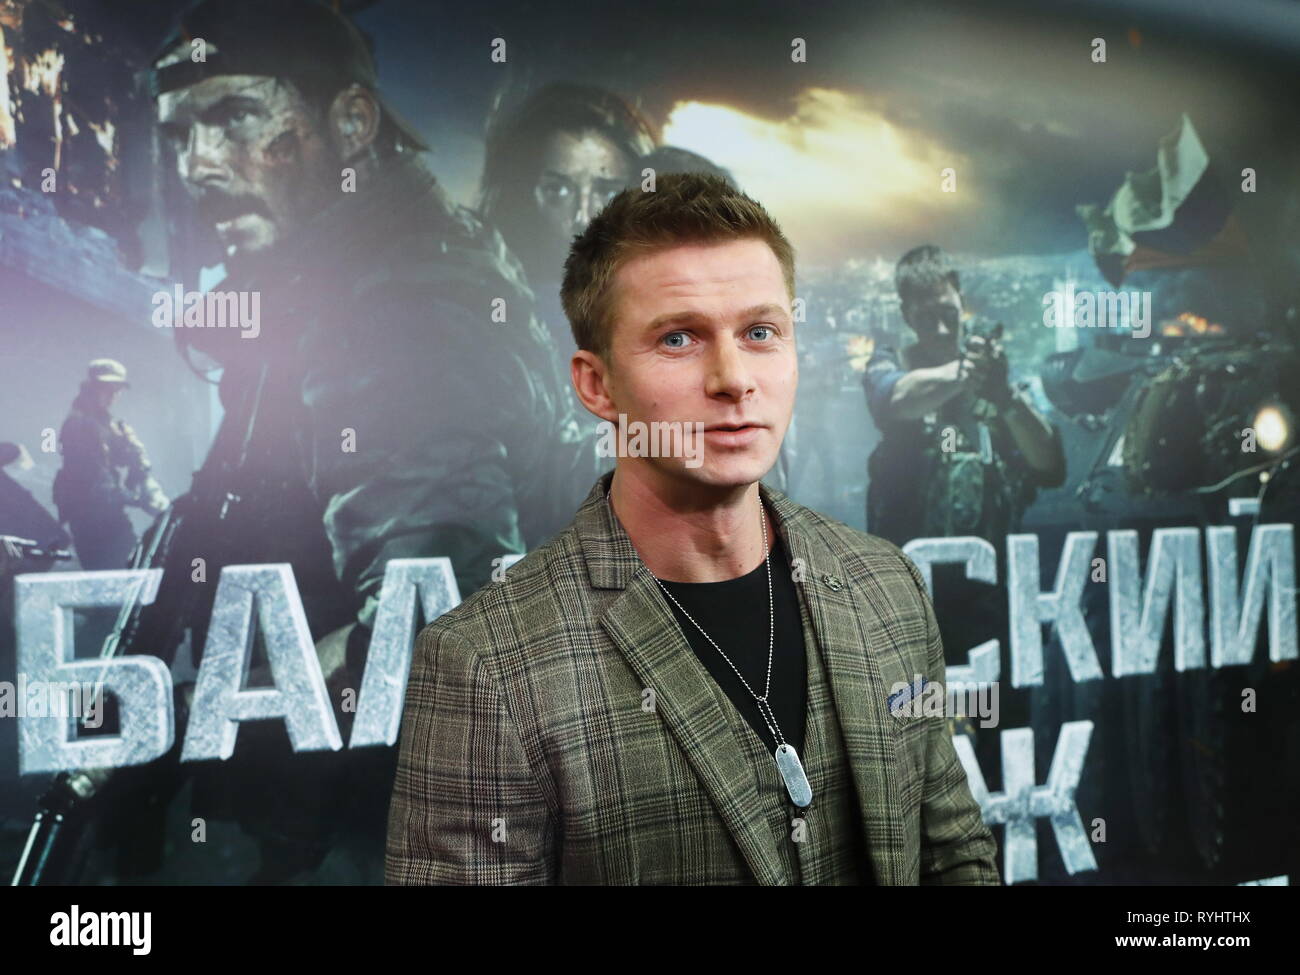 MOSCOW, RUSSIA - MARCH 14, 2019: Actor Roman Kuritsyn attends the premiere  of the Russian-Serbian action film The Balkan Line directed by Andrei  Volgin, at the Karo 11 Oktyabr cinema. Sergei Karpukhin/TASS